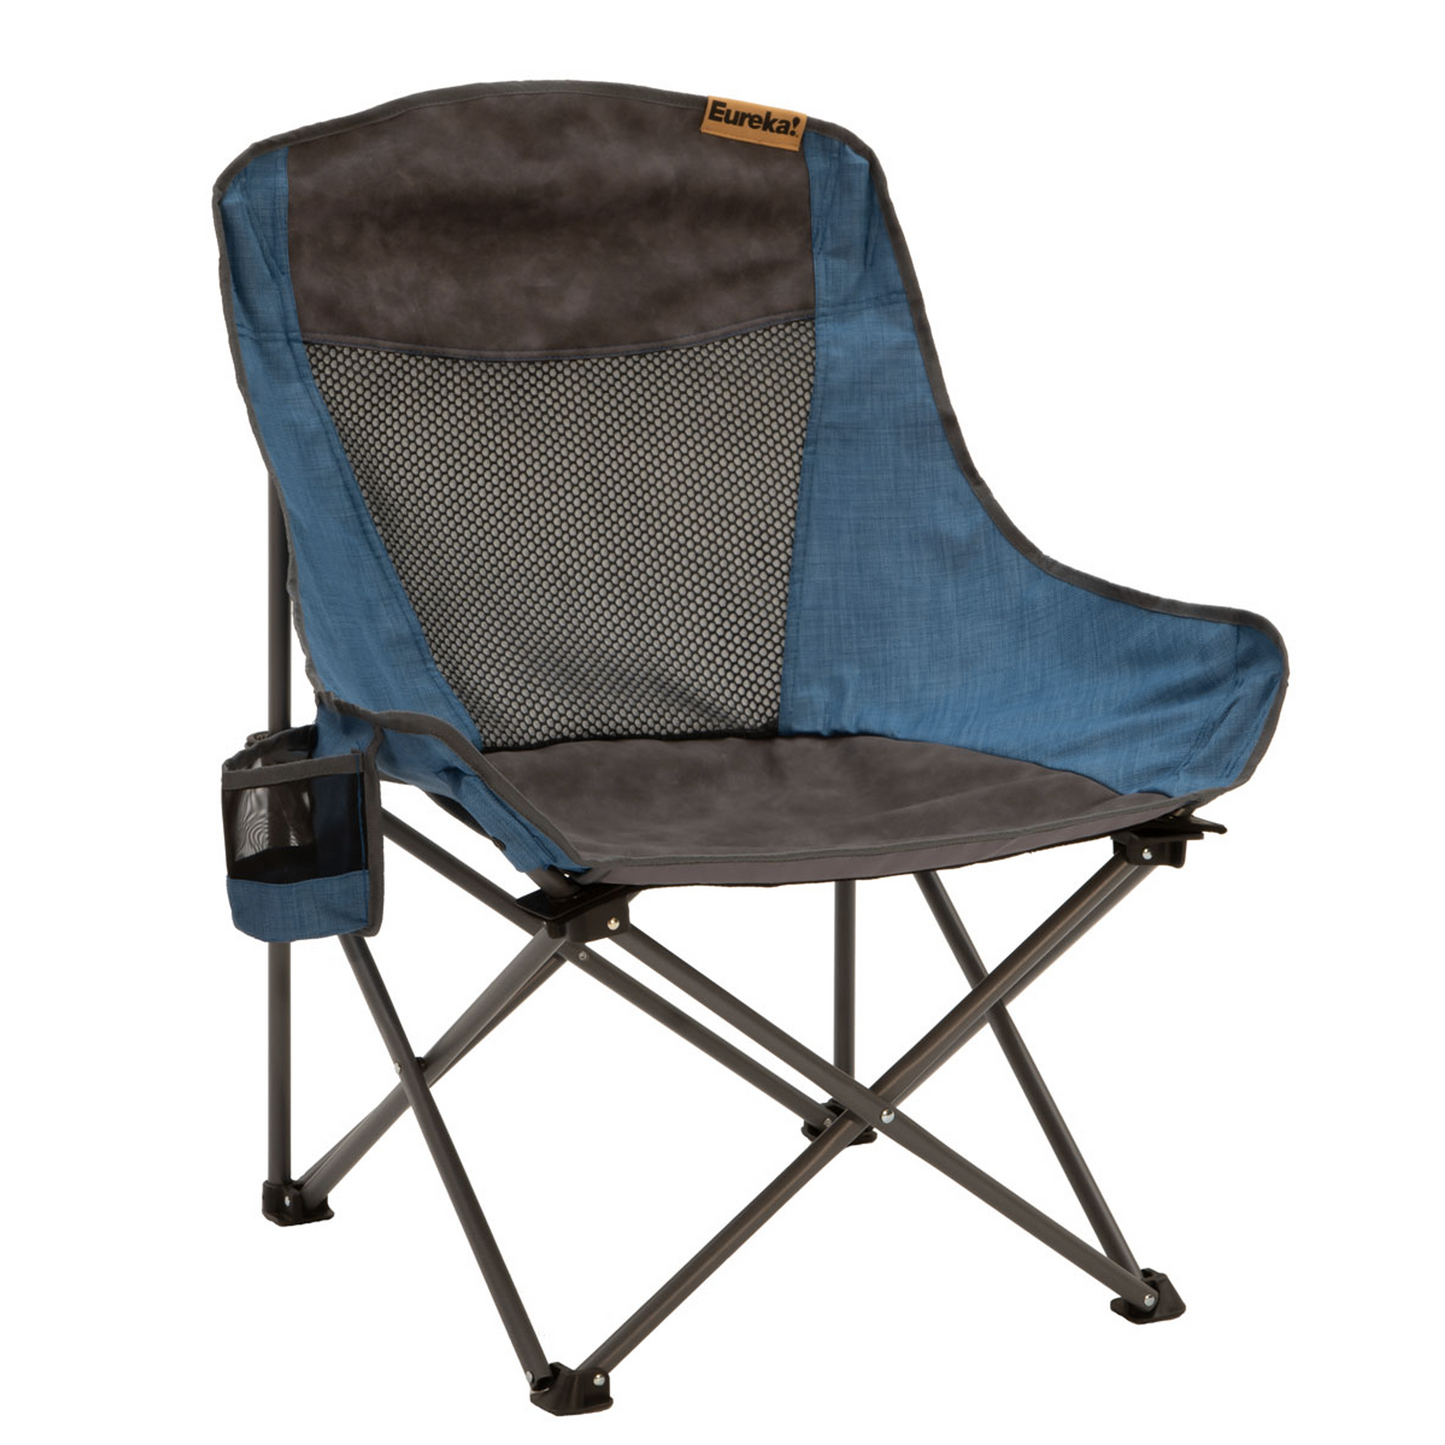 Lowrider Chair Big Adventure Outfitters